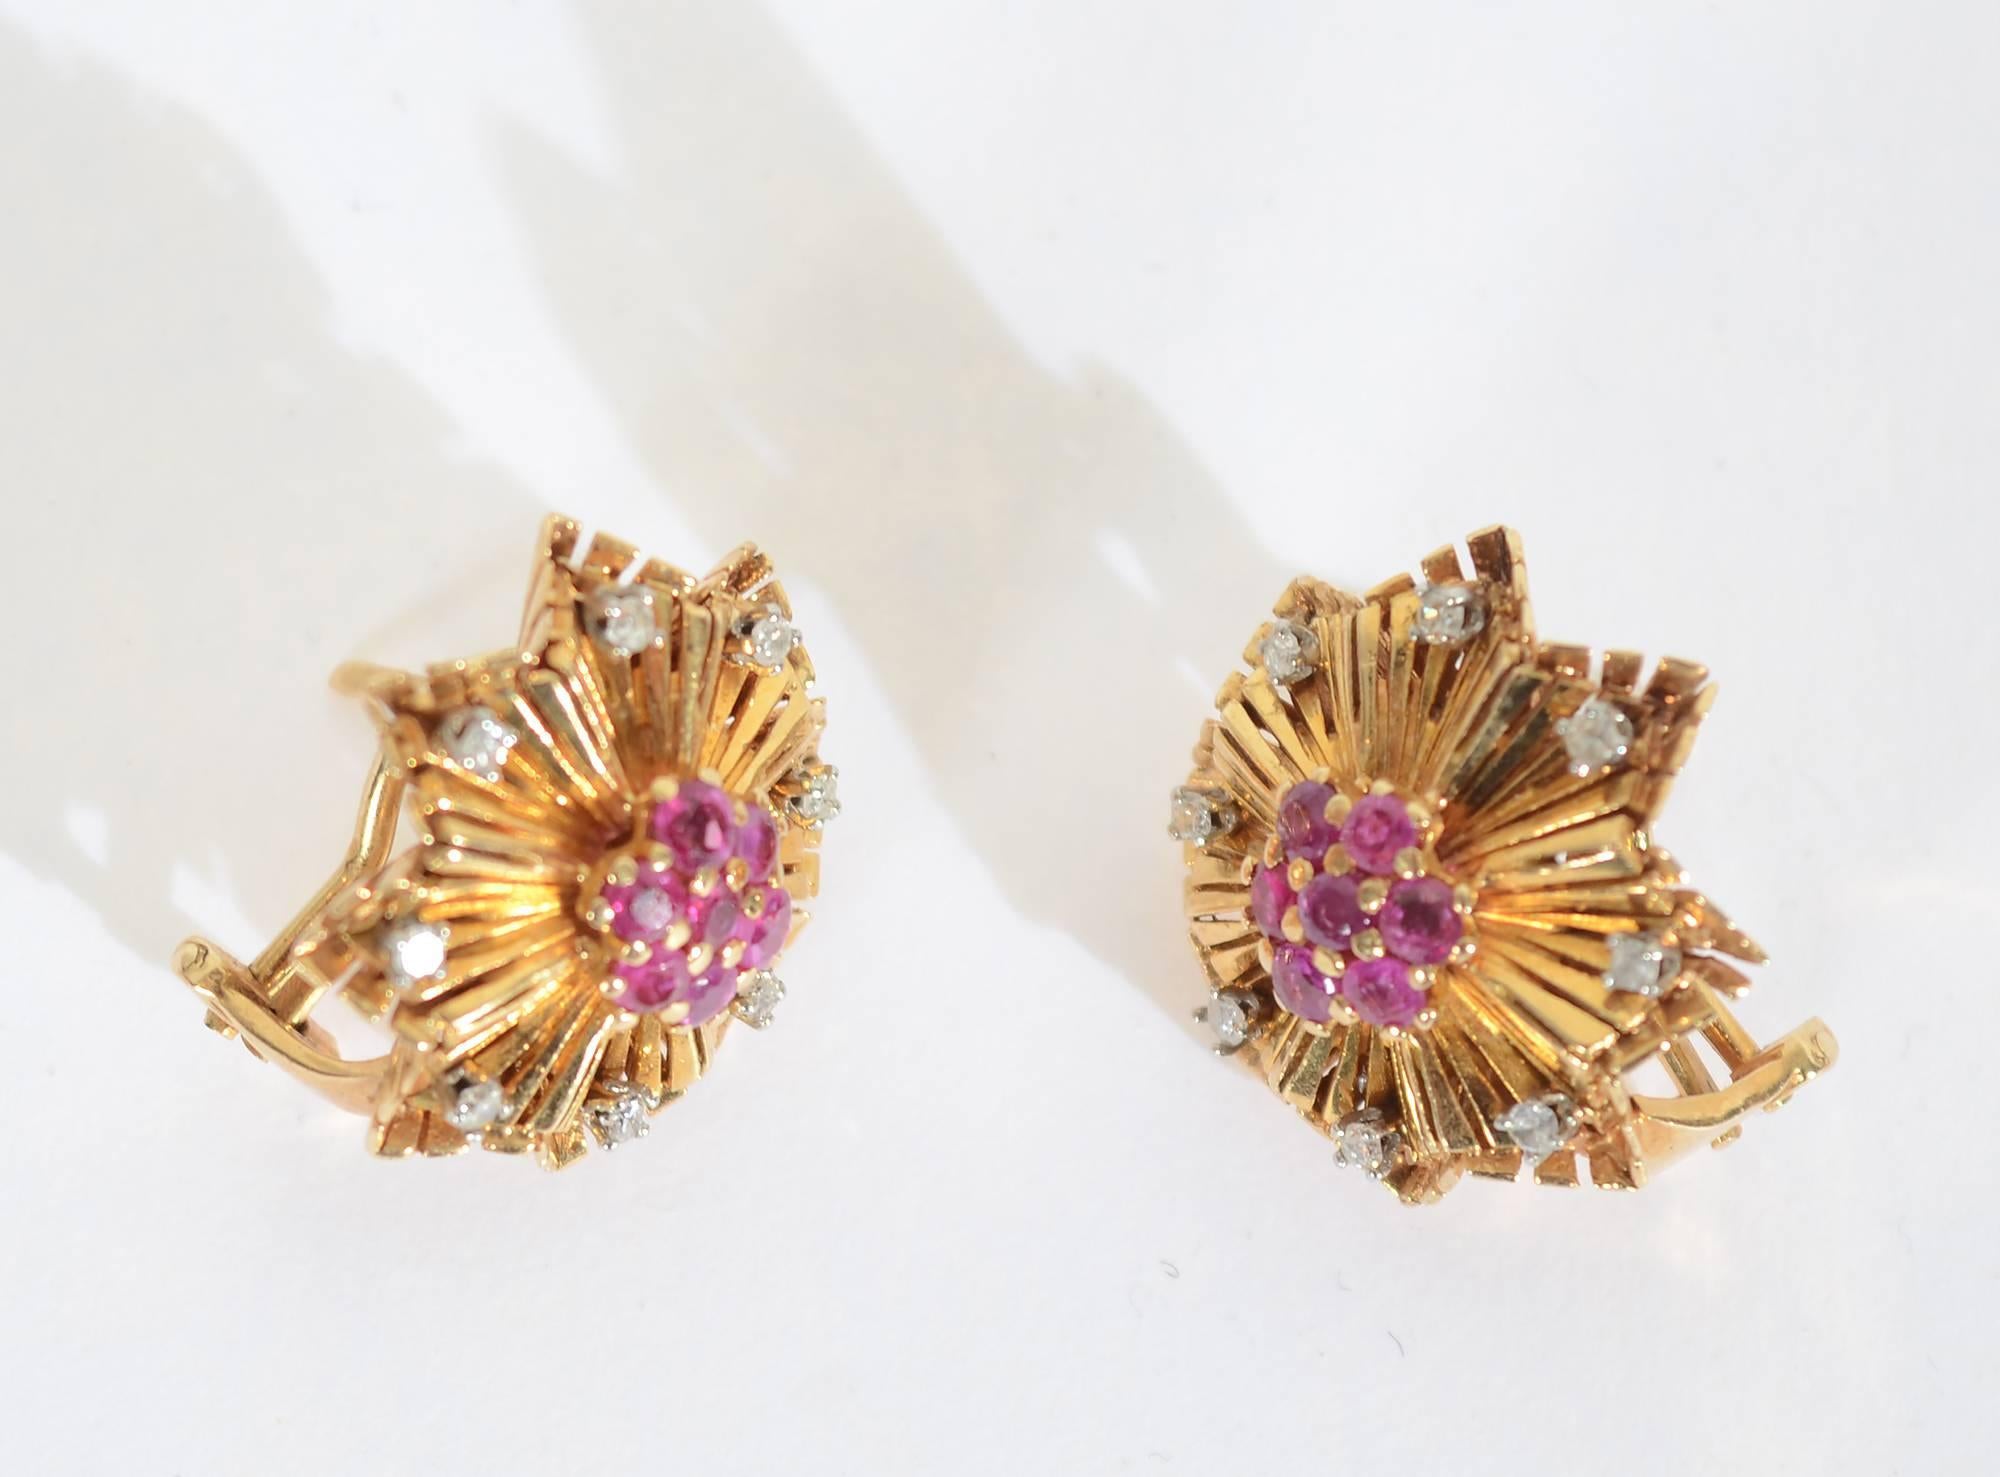 These Retro earrings were made in the 1940's but as stylish as if made today. 
A diamond is cradled within each three dimensional arm of the star. Seven rubies are clustered in the center.
The earrings are 13/16